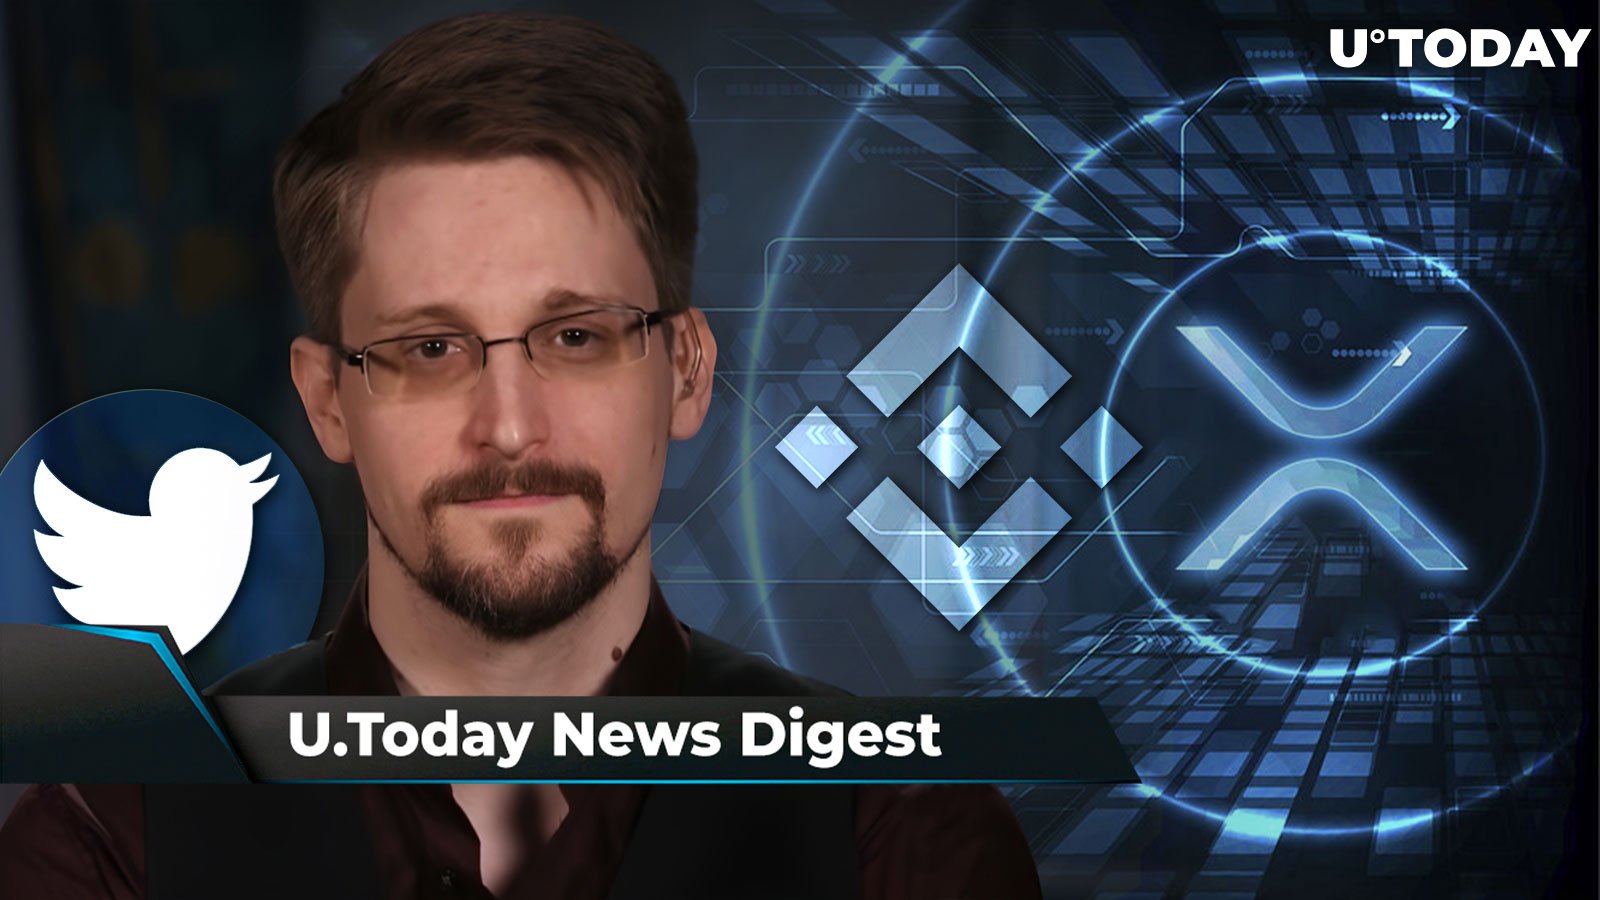 Binance to Move Millions of XRP, SHIB Burning Extremely Different Since December, Edward Snowden Wants to Be Paid in BTC as Twitter CEO: Crypto News Digest by U.Today